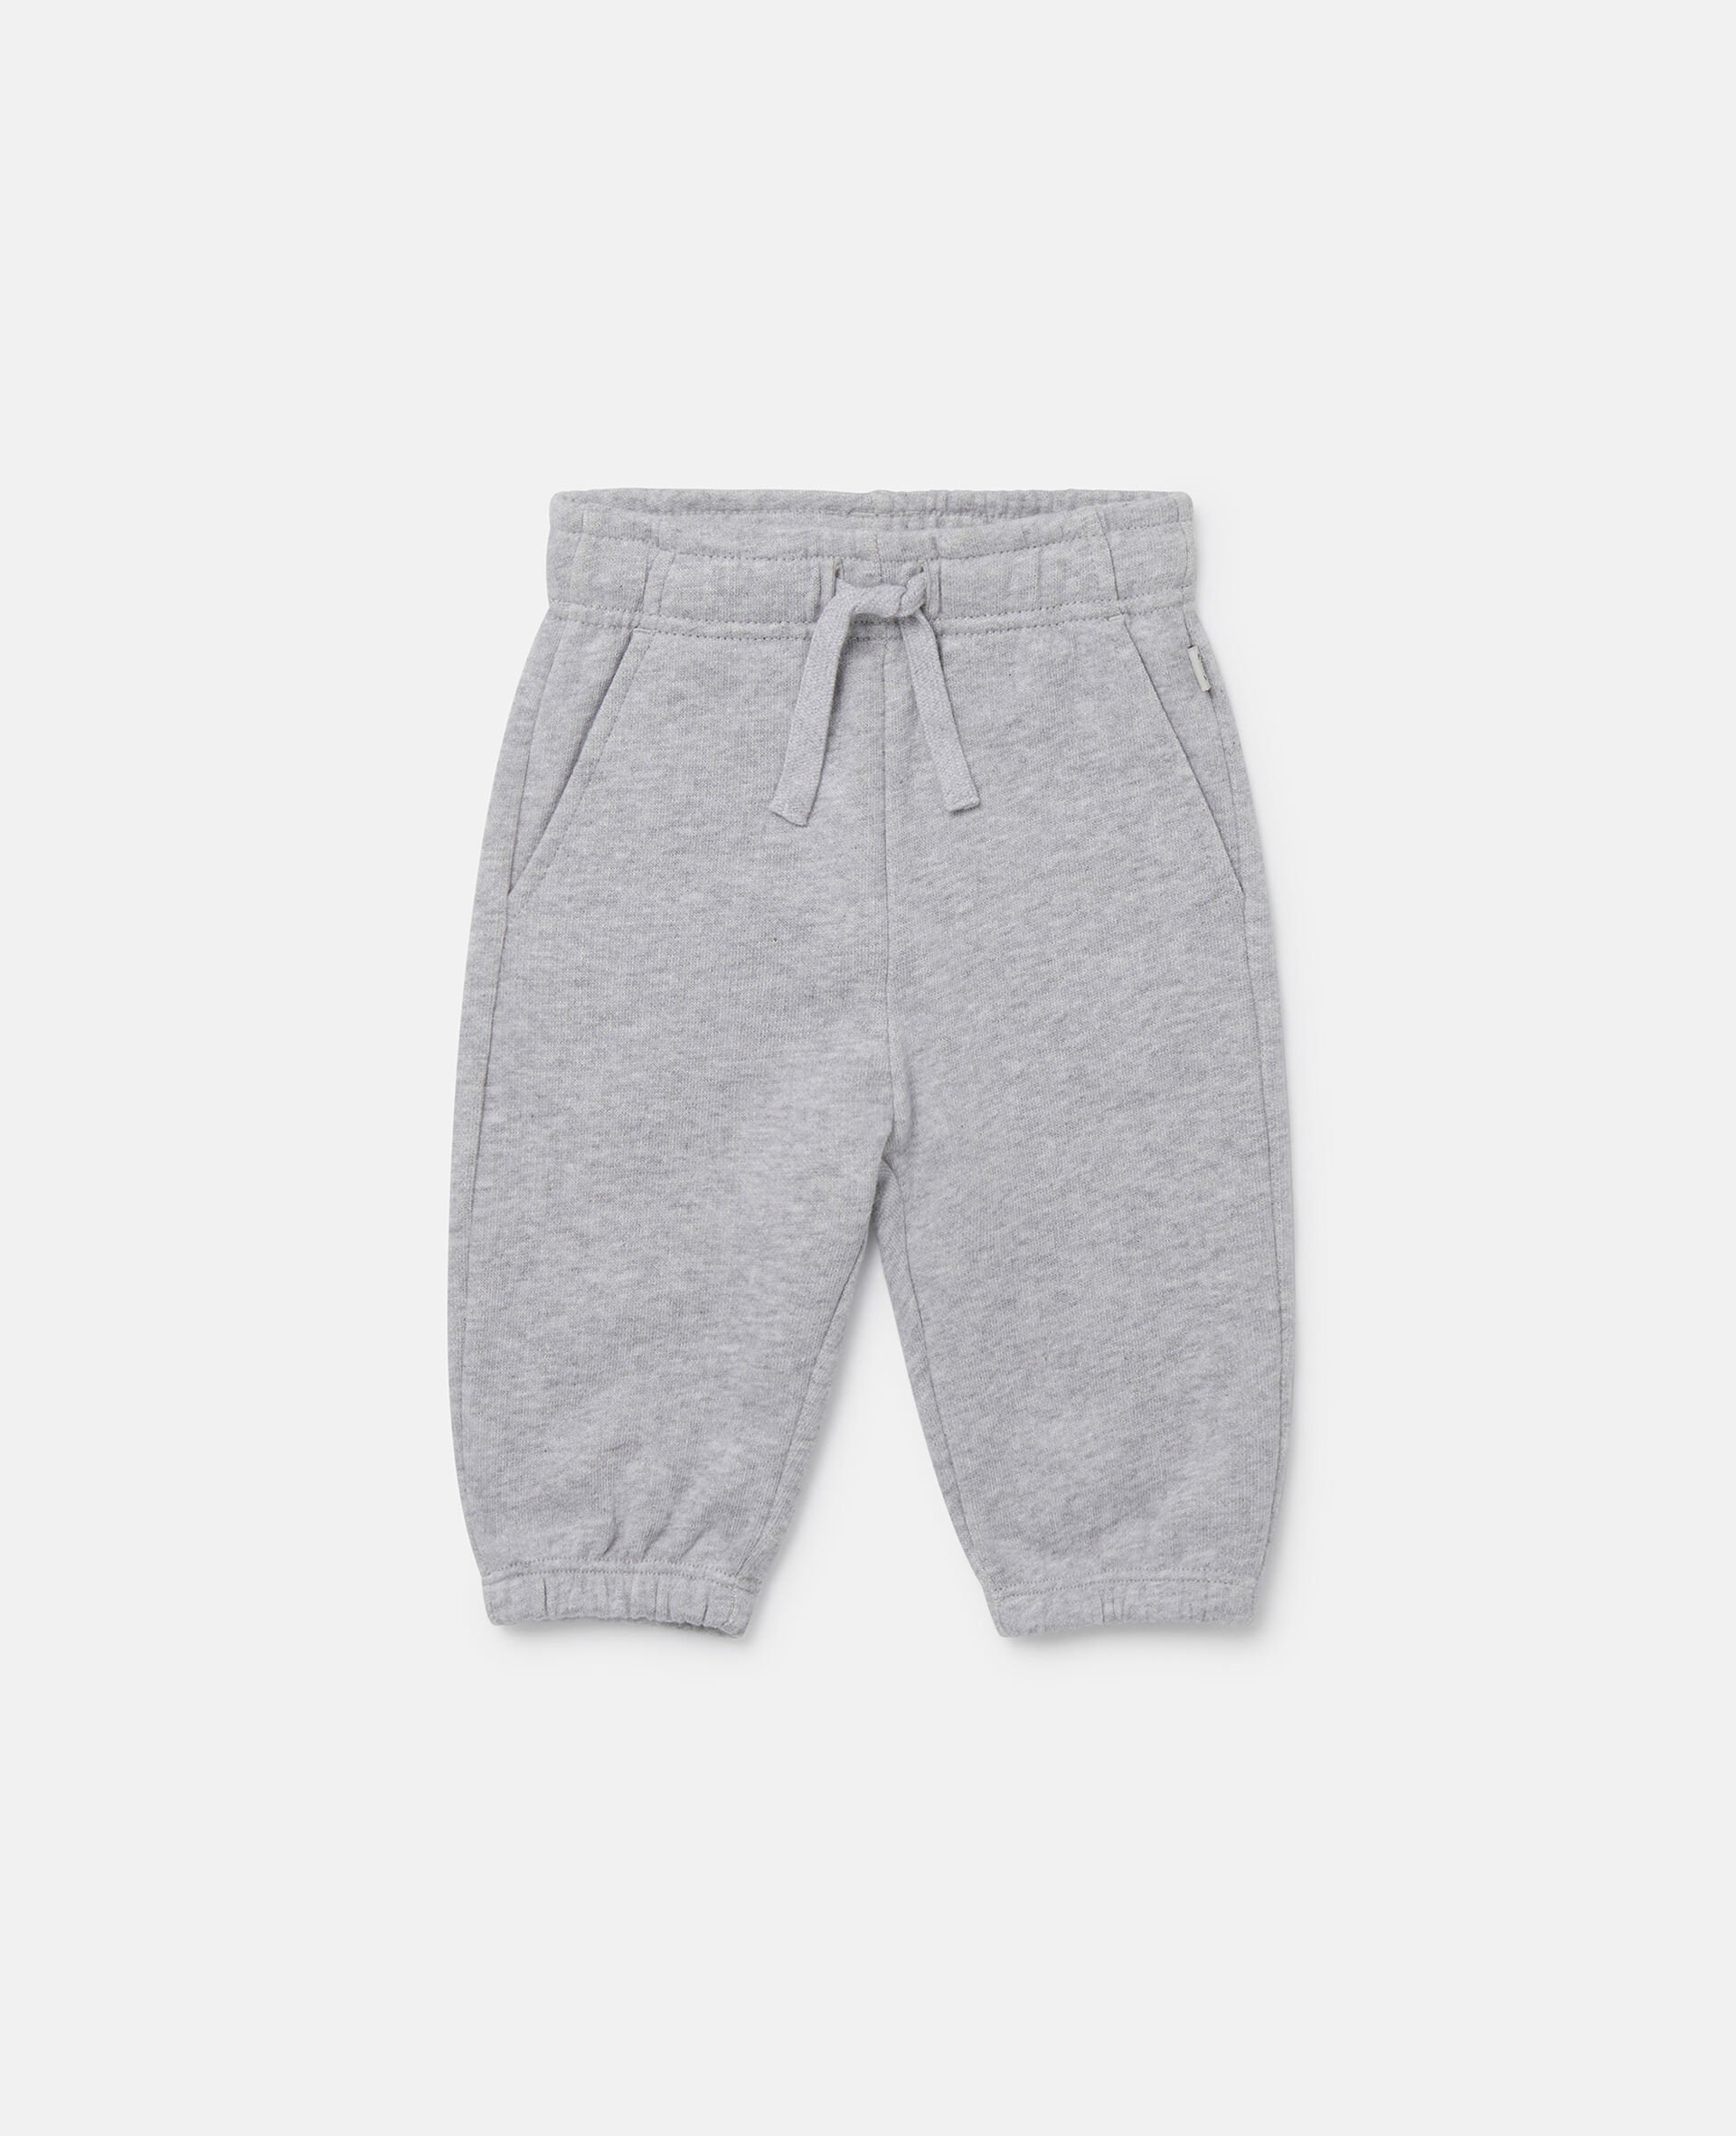 Marl Joggers-Grey-large image number 0